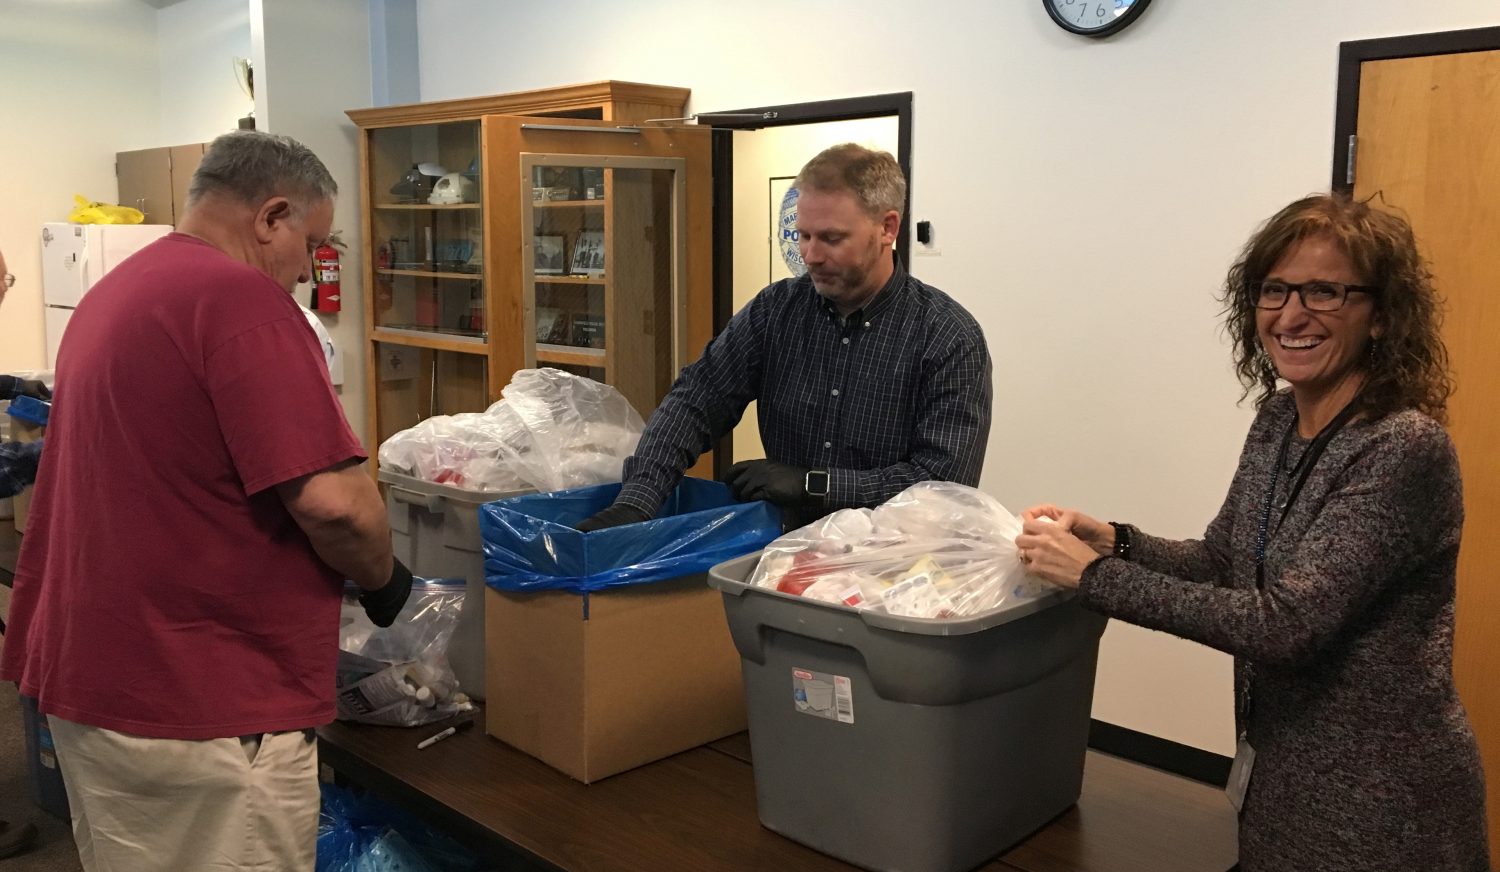 From left: Arnie Mancl, Marshfield Police Lt. Darren Larson, and Kathy Leick sort and prepare submitted drugs before sending them off to be incinerated.